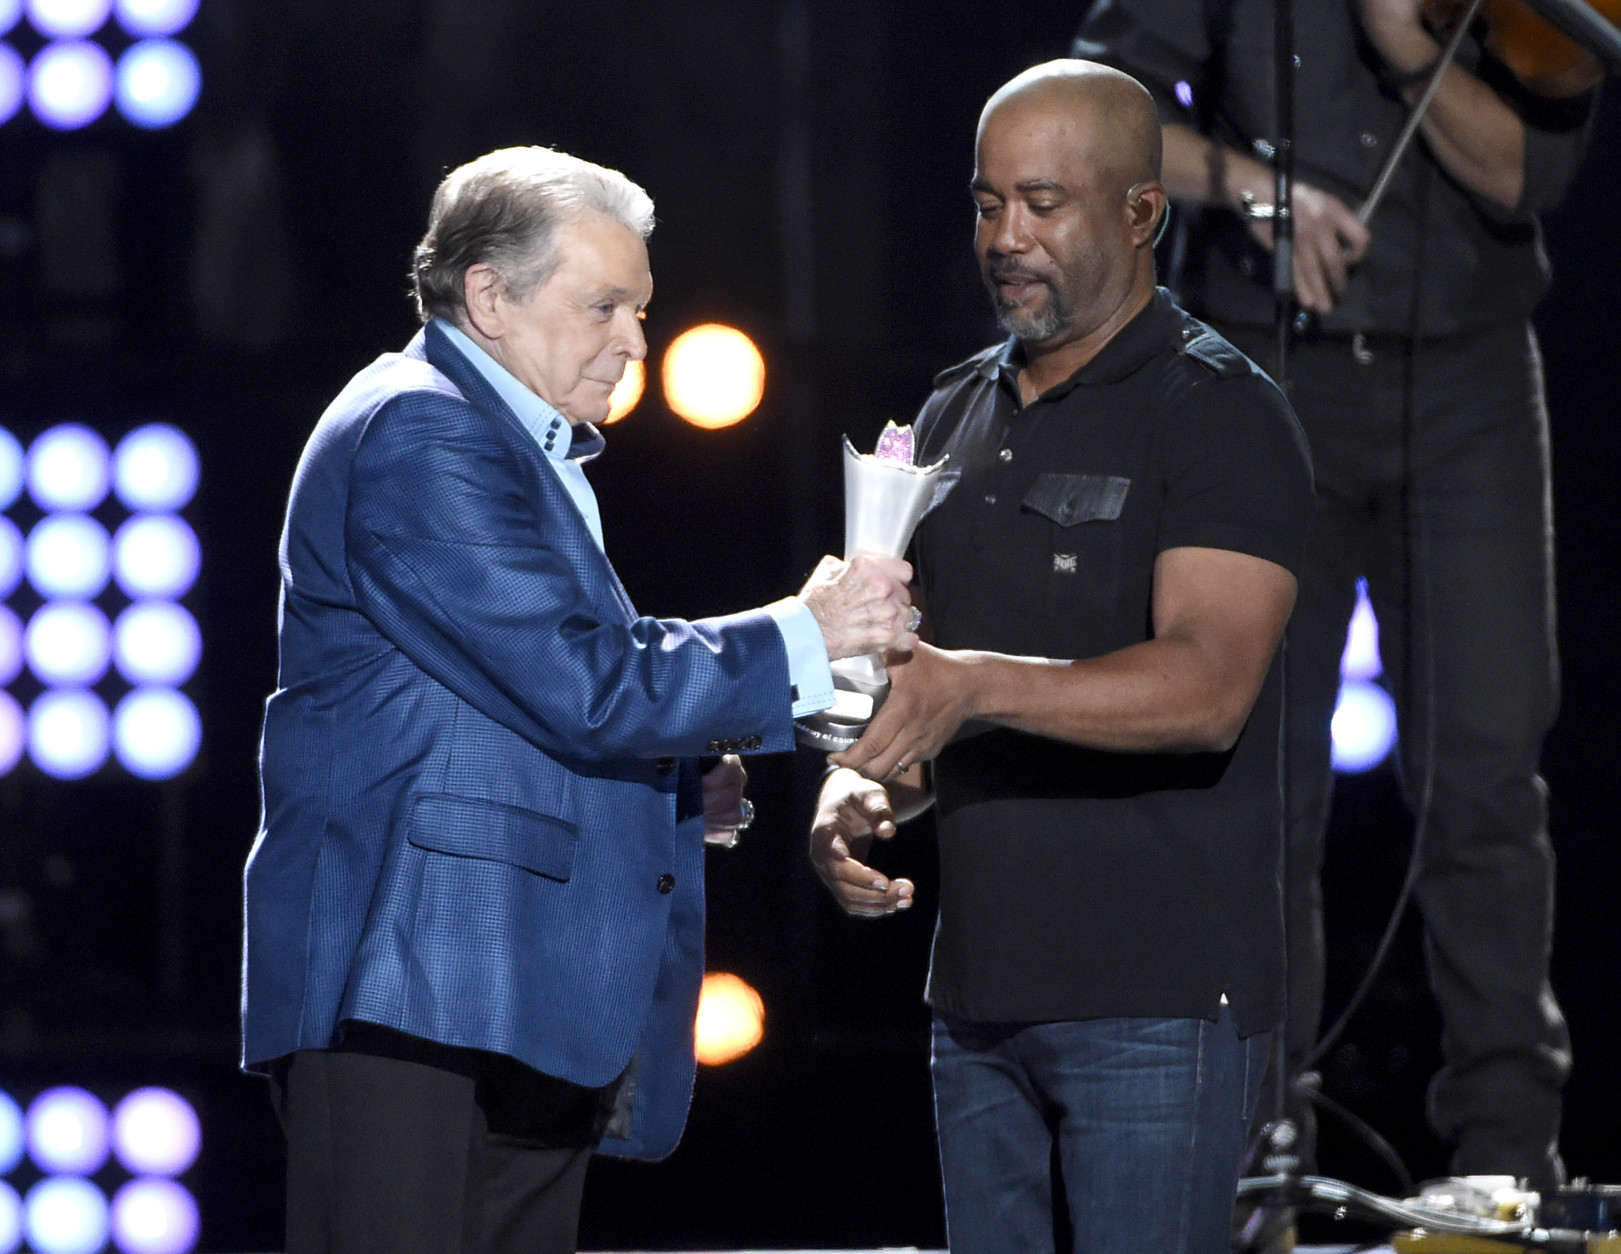 Darius Rucker, right, presents the triple crown award to Mickey Gilley at ACM Presents Superstar Duets at Globe Life Park on Friday, April 17, 2015, in Arlington, Texas. (Photo by Chris Pizzello/Invision/AP)